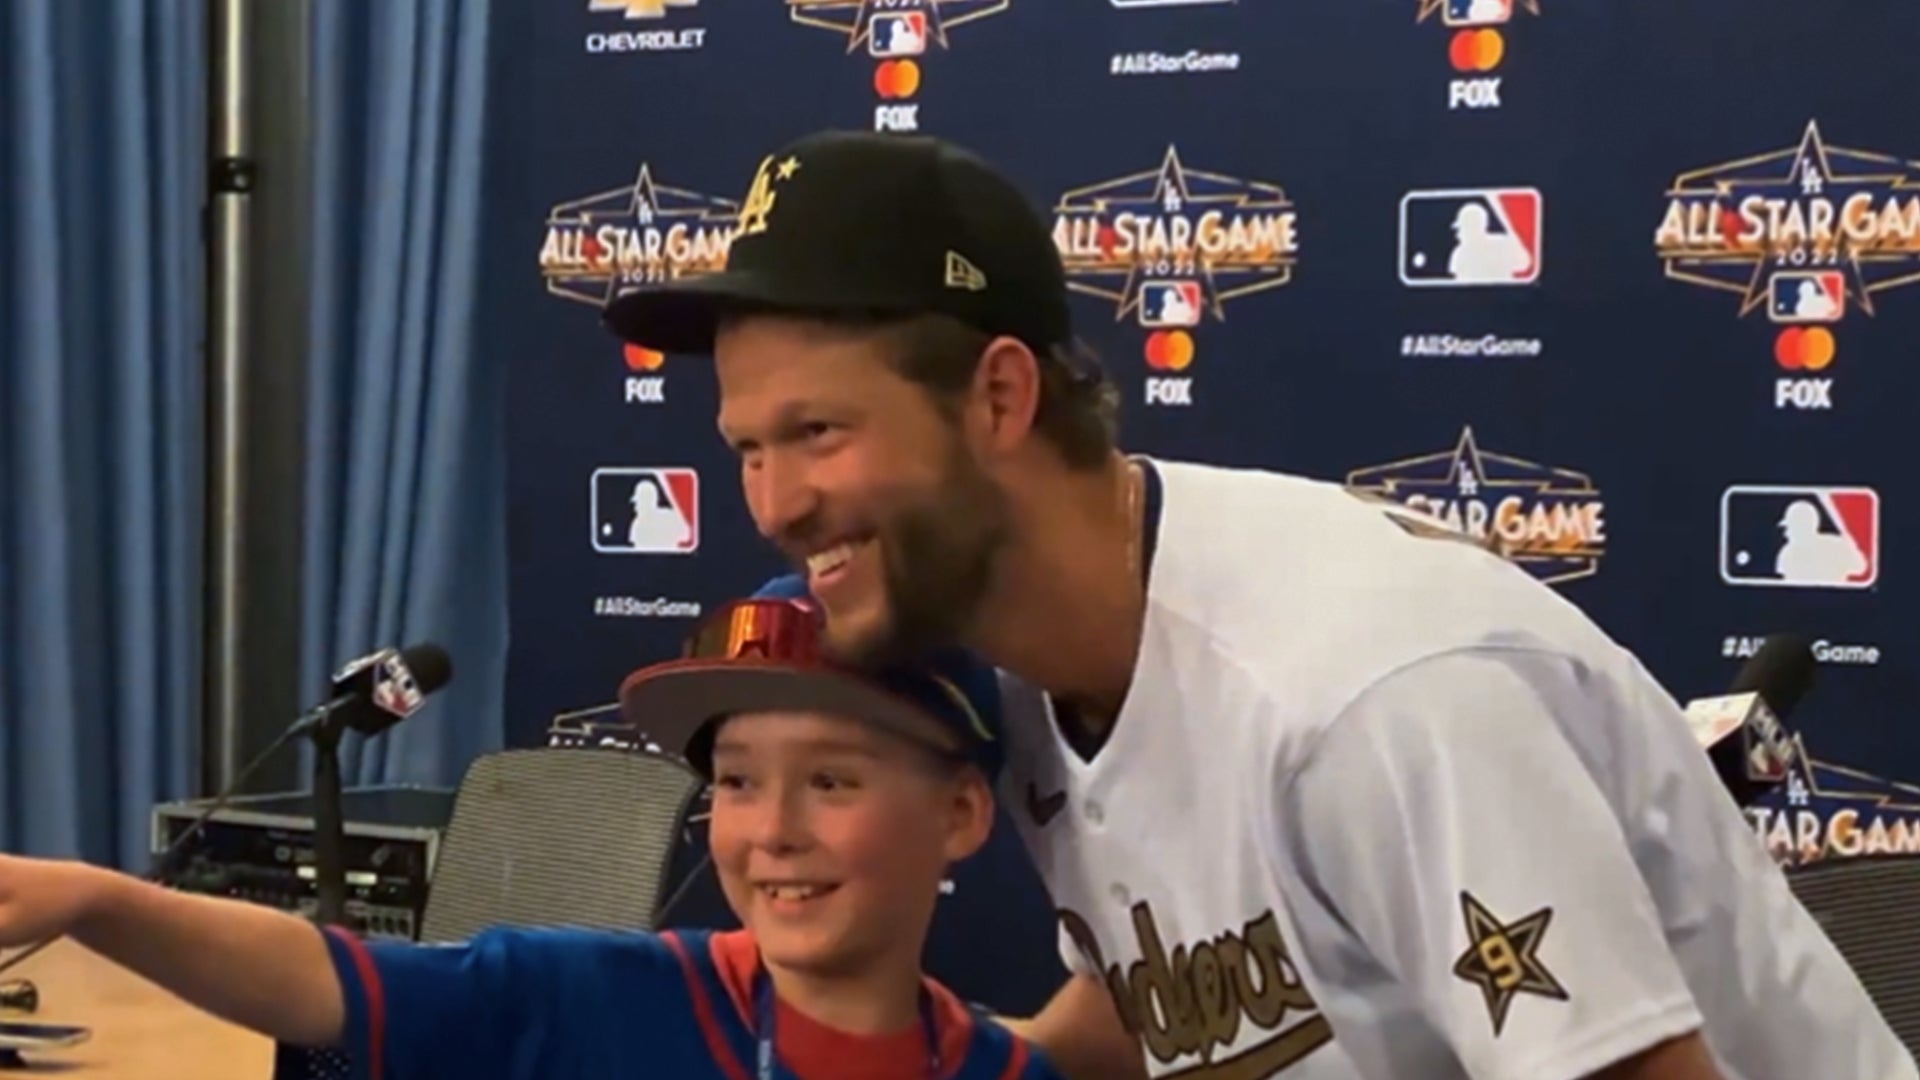 Amid Hugs and Tears, Dodger Pitcher Clayton Kershaw Helps 10-Year